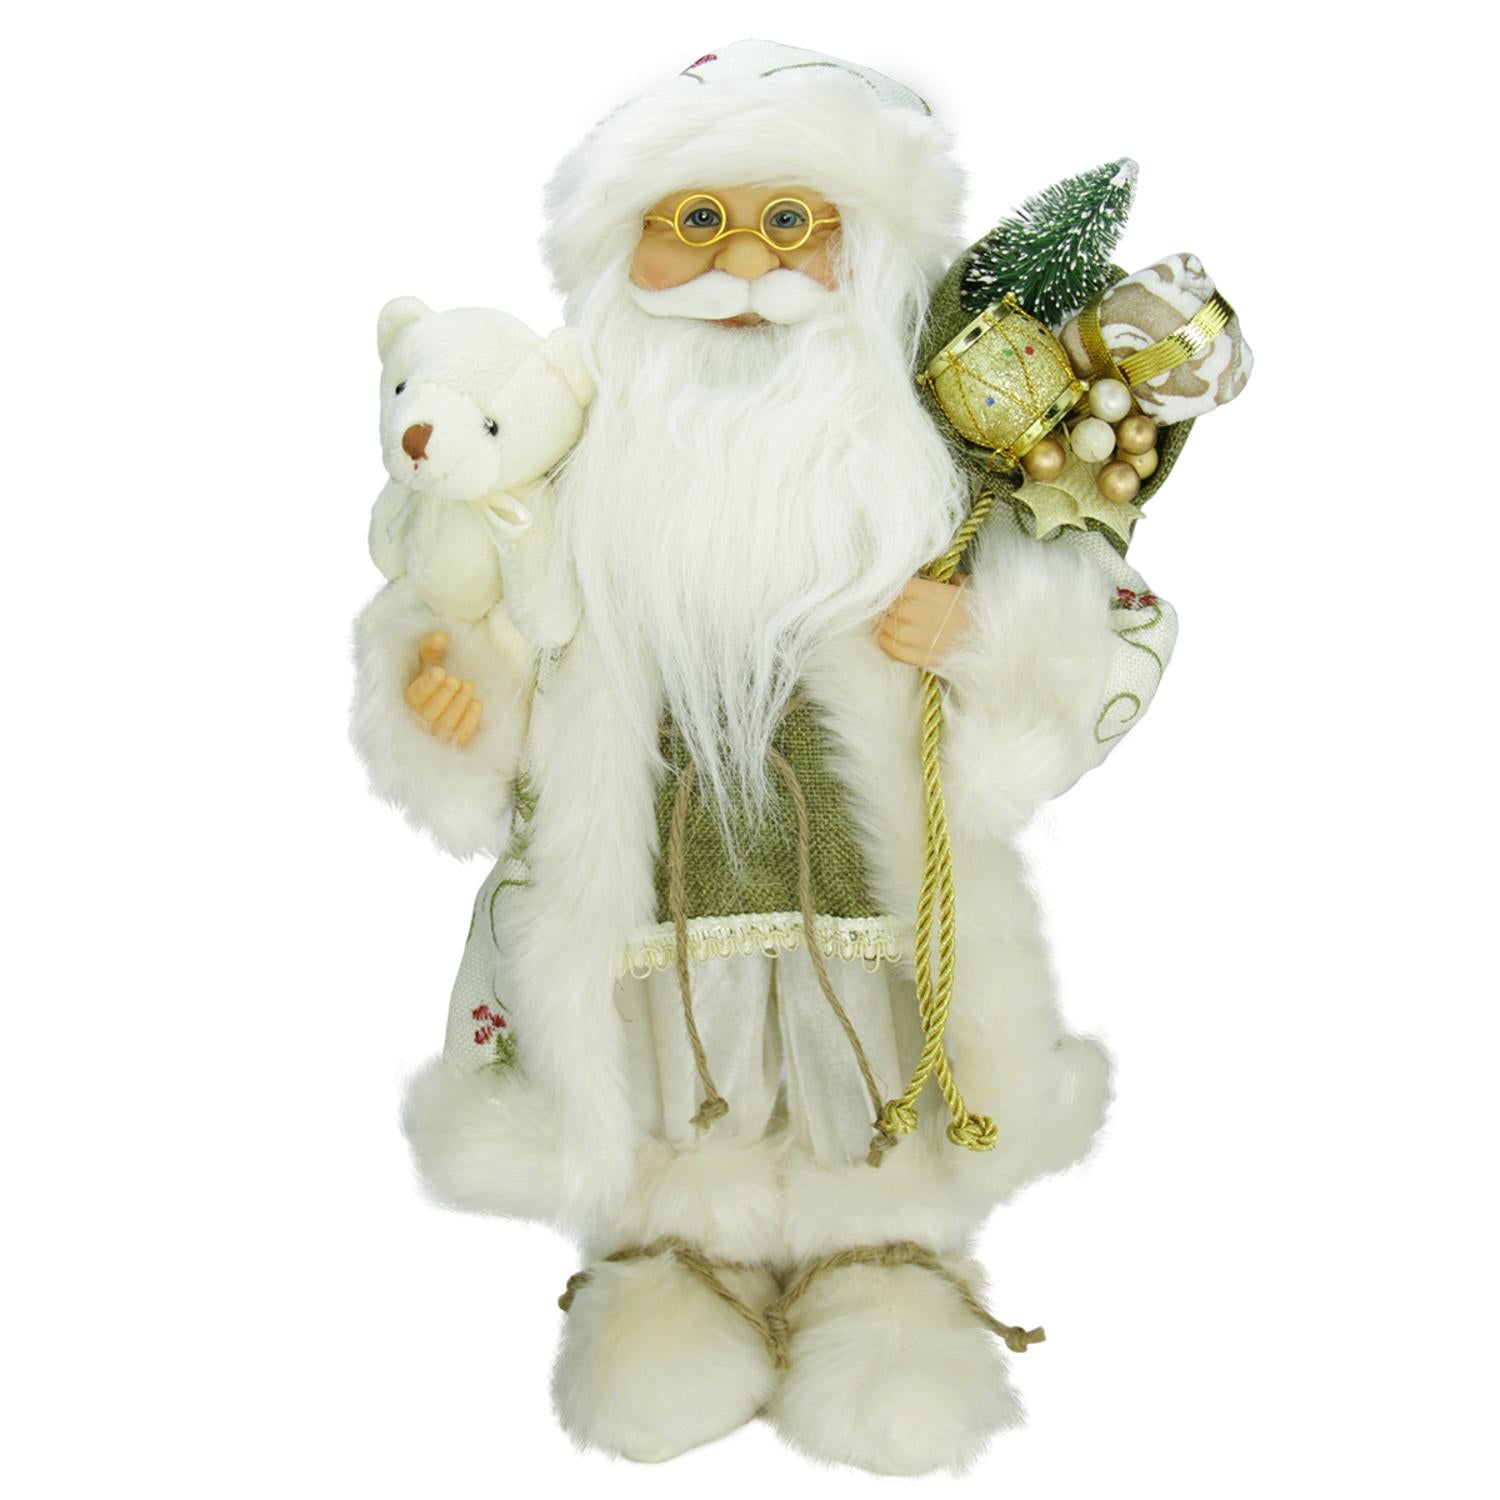 16" Graceful Standing Santa Claus Christmas Figure in Ivory with Teddy Bear